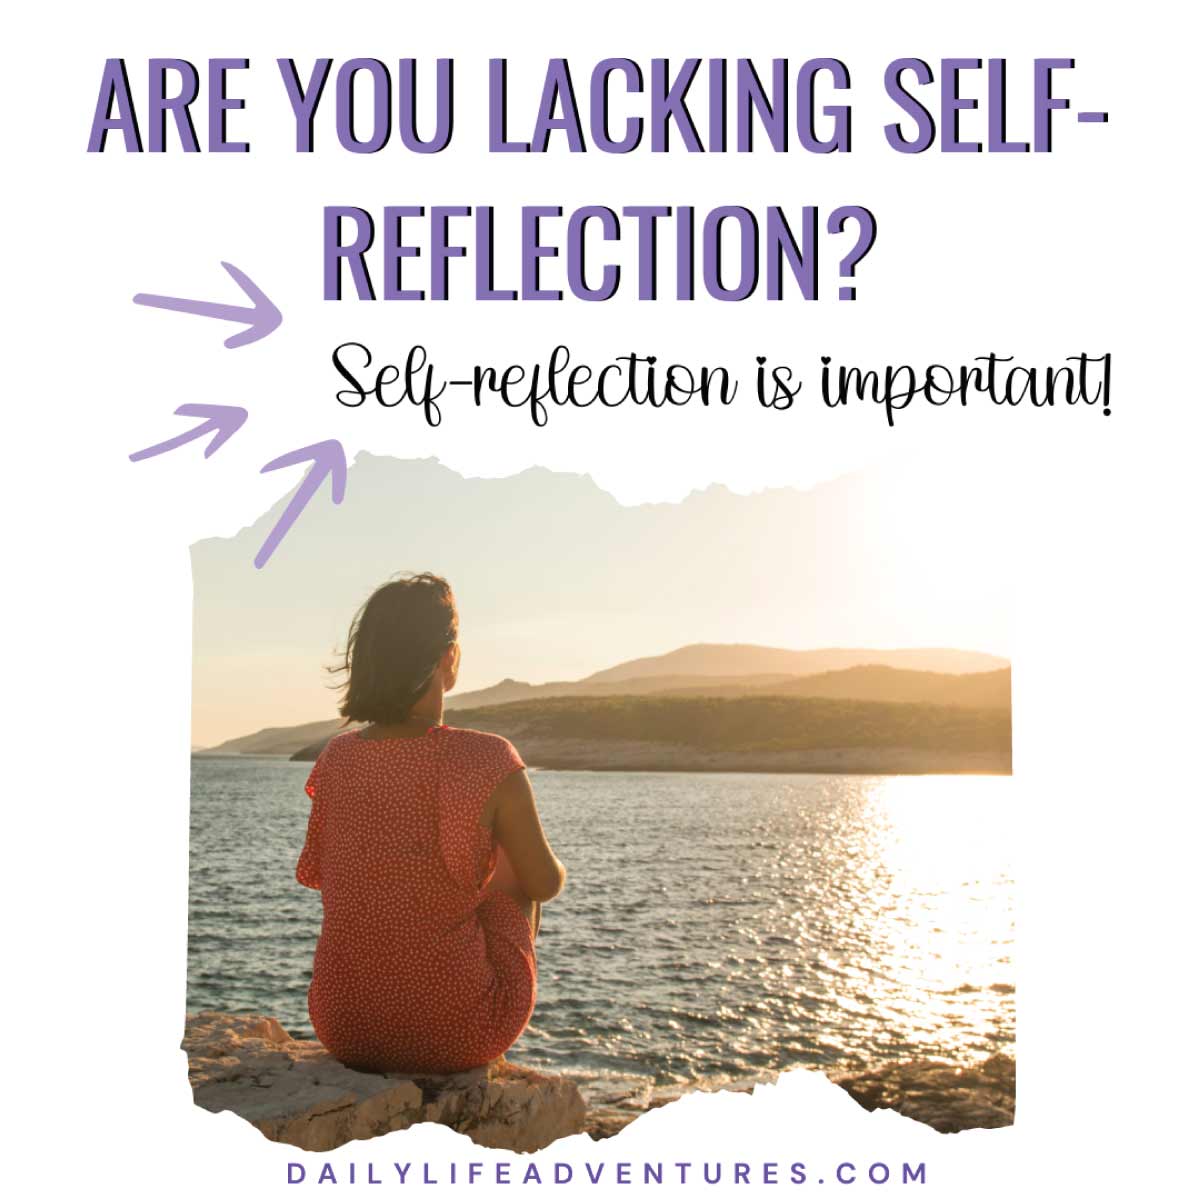 5 Signs You Lack Self-Reflection In Your Life